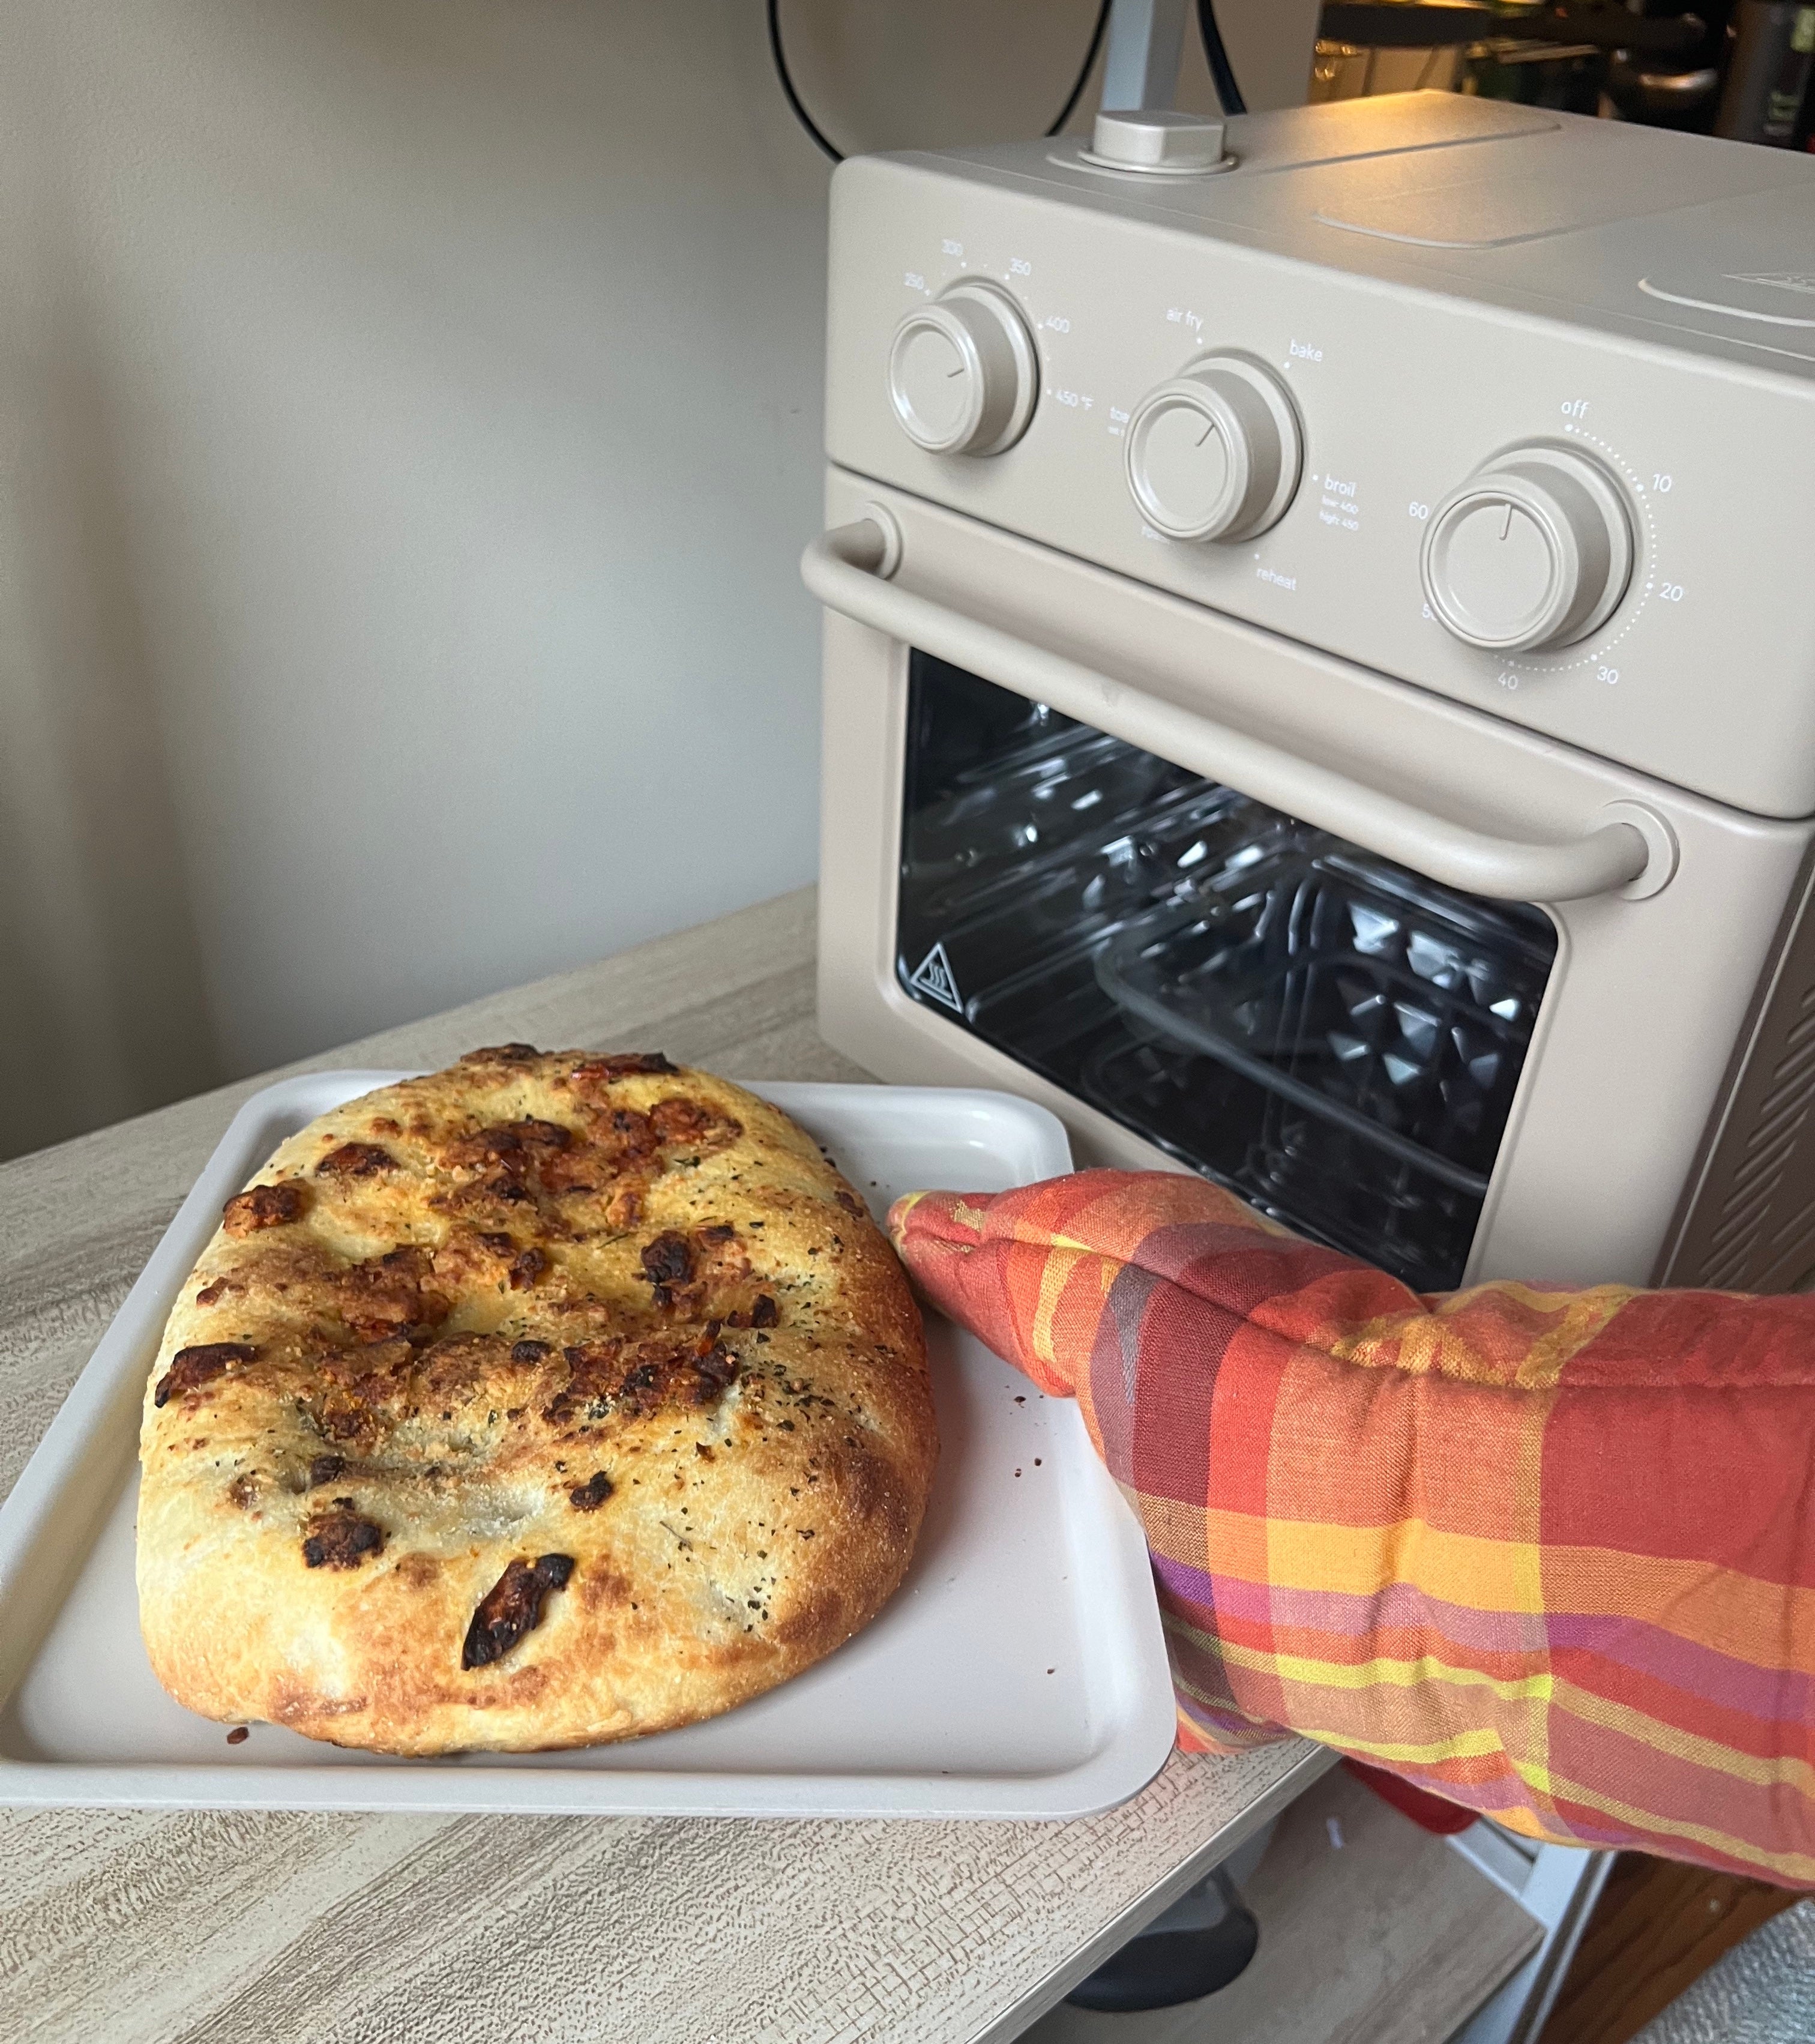 Our Place Wonder Oven Review — Jazz Leaf